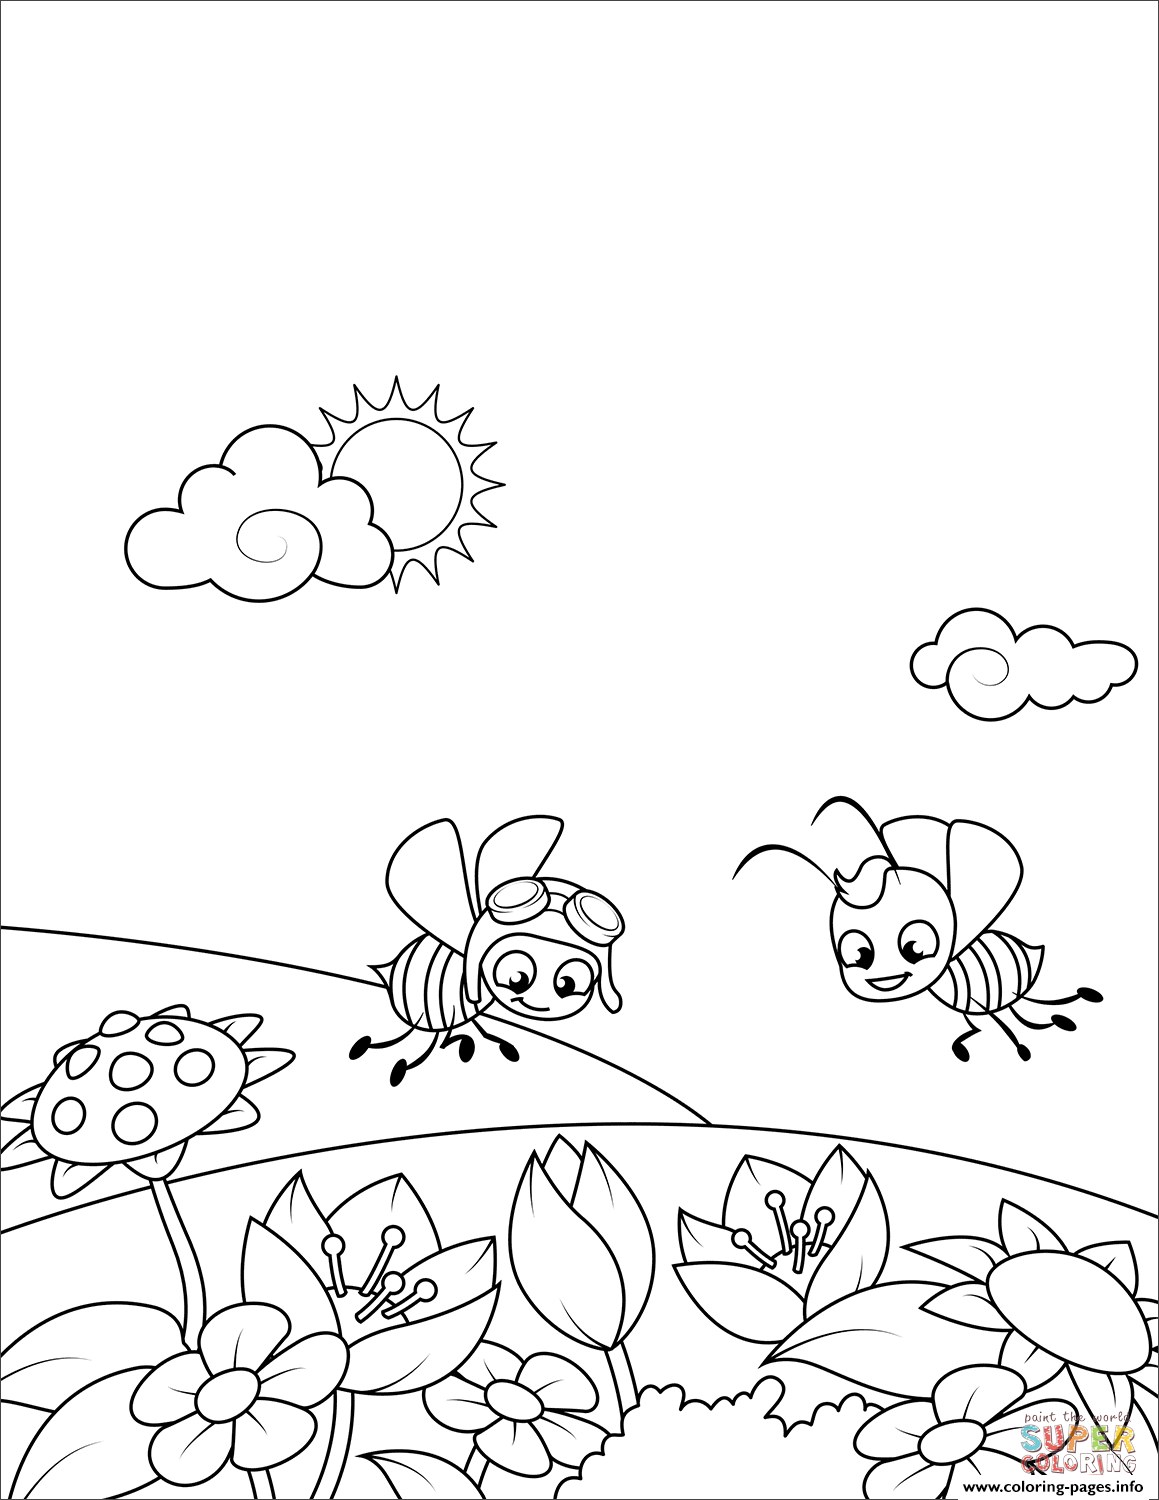 Two Bees Fly Over A Flowering Meadow coloring